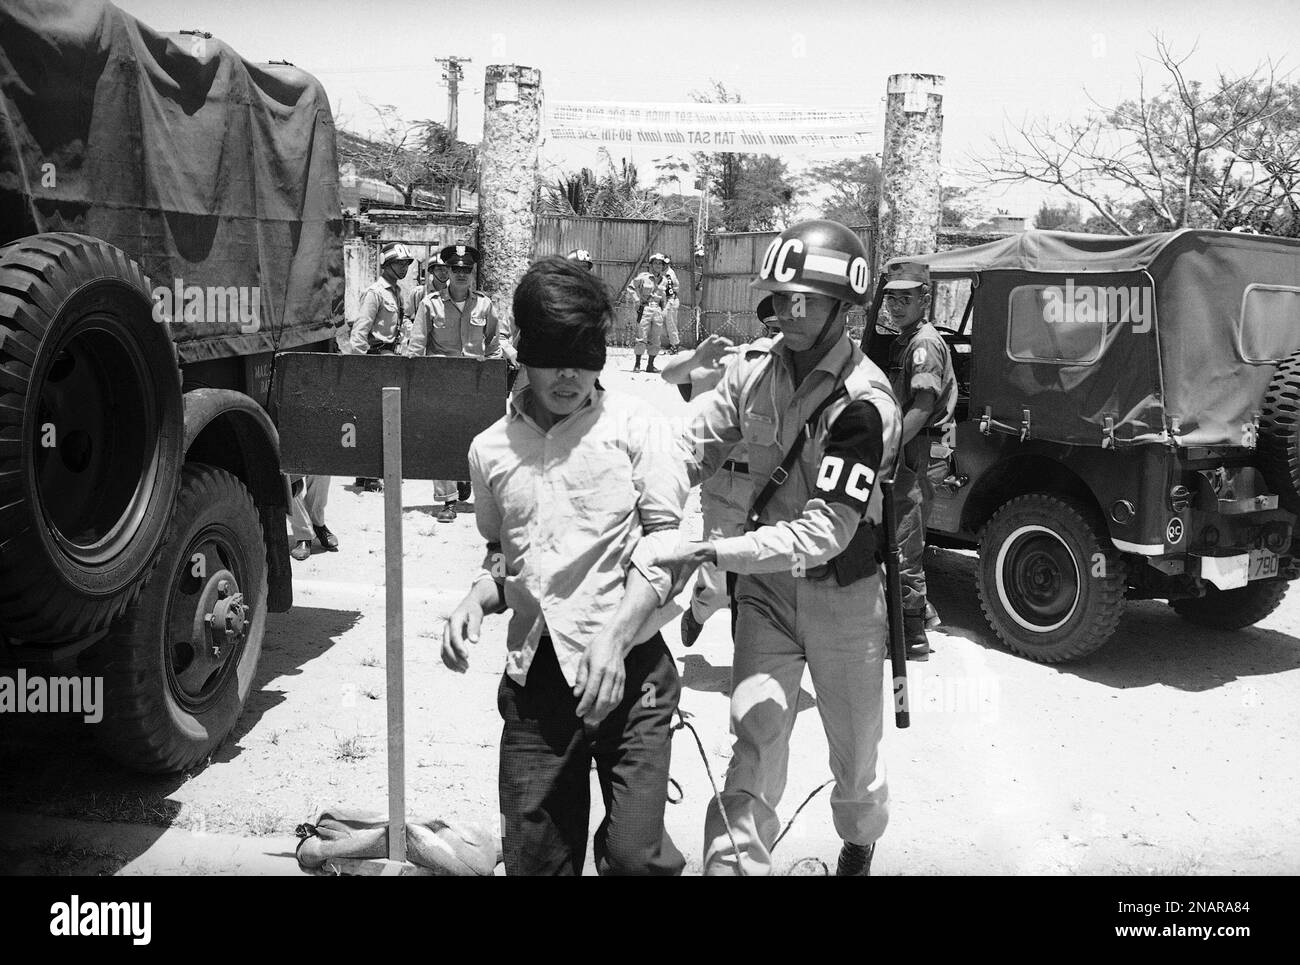 Viet Cong terrorist Le Dau, 24, is blindfolded as he is led to stake at which he was executed by a firing squad in Da Nang, April 15, 1965. He was convicted of attempting to blow up a hotel occupied by Americans in Da Nang on April 4. (AP Photo/Eddie Adams) Stock Photo